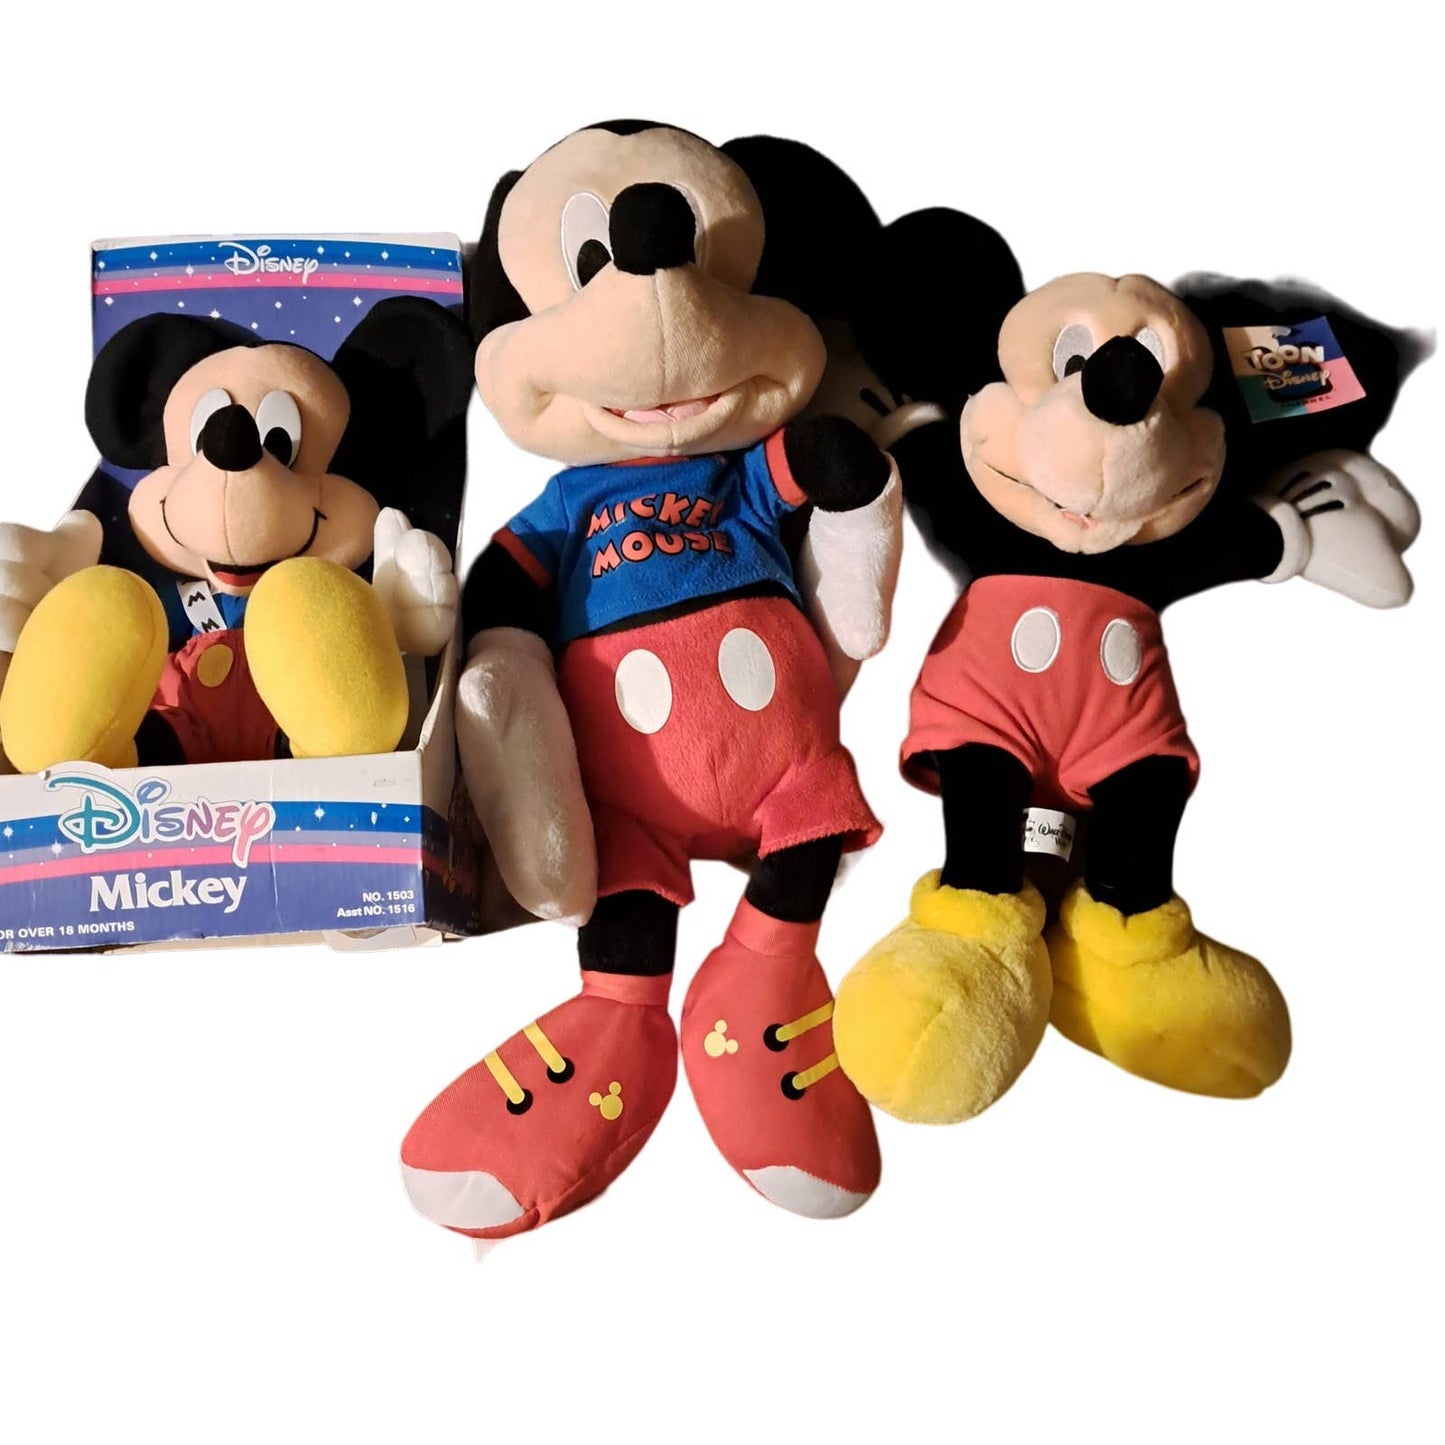 SALE! 3 NEW - Mickey Mouse 19 inch -16 inch -14 inch FABULOUS MICKEY